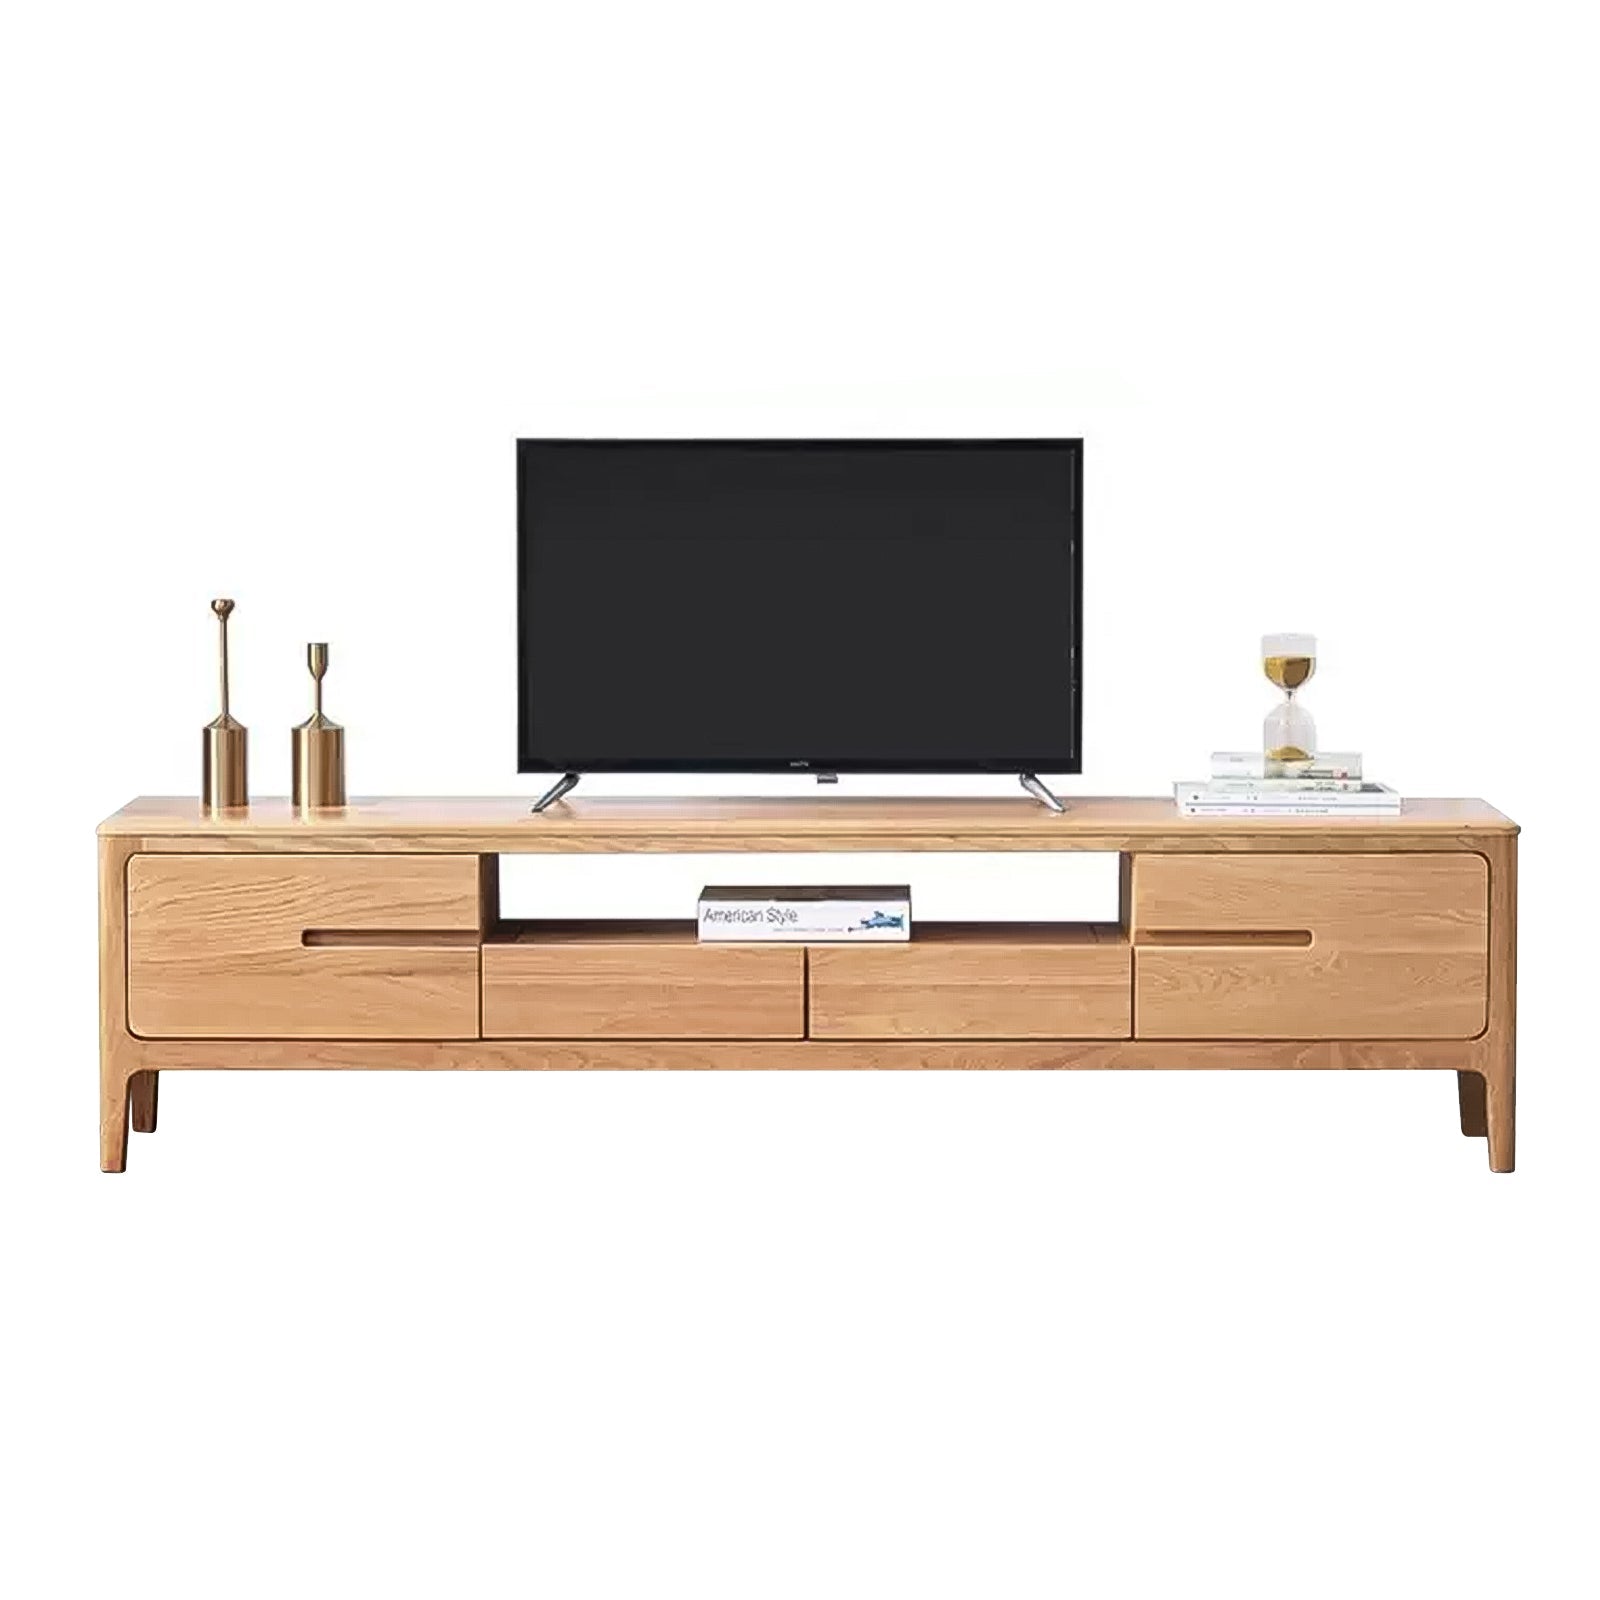 Solid wood TV cabinet small household storage cabinet coffee table  combination - fancyarnfurniture